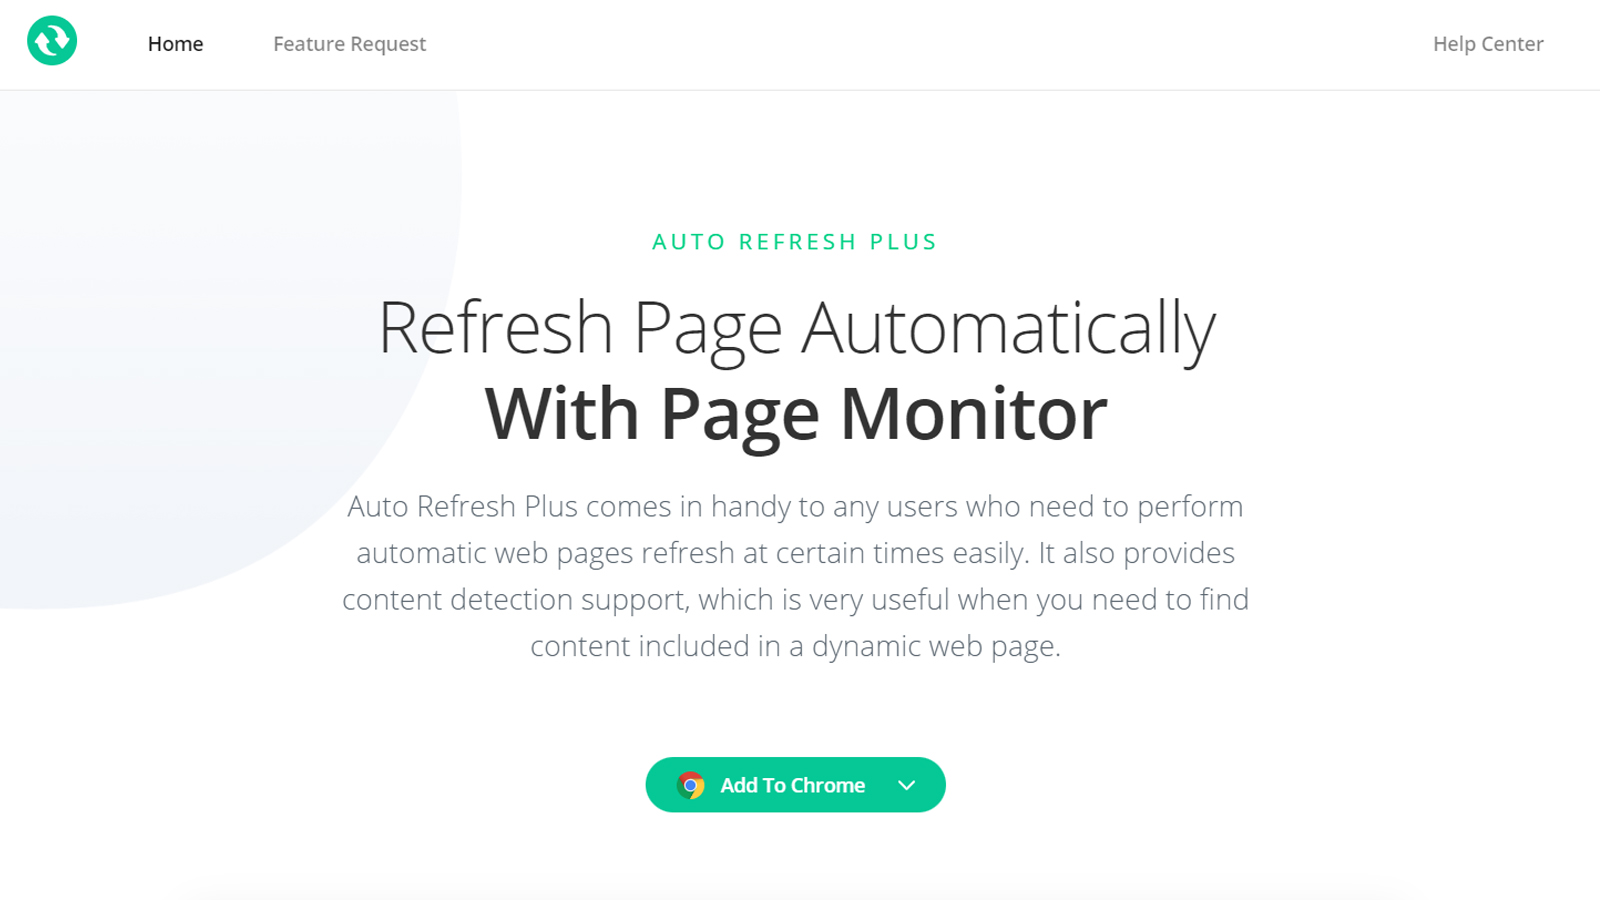 Find pricing, reviews and other details about Auto Refresh Plus